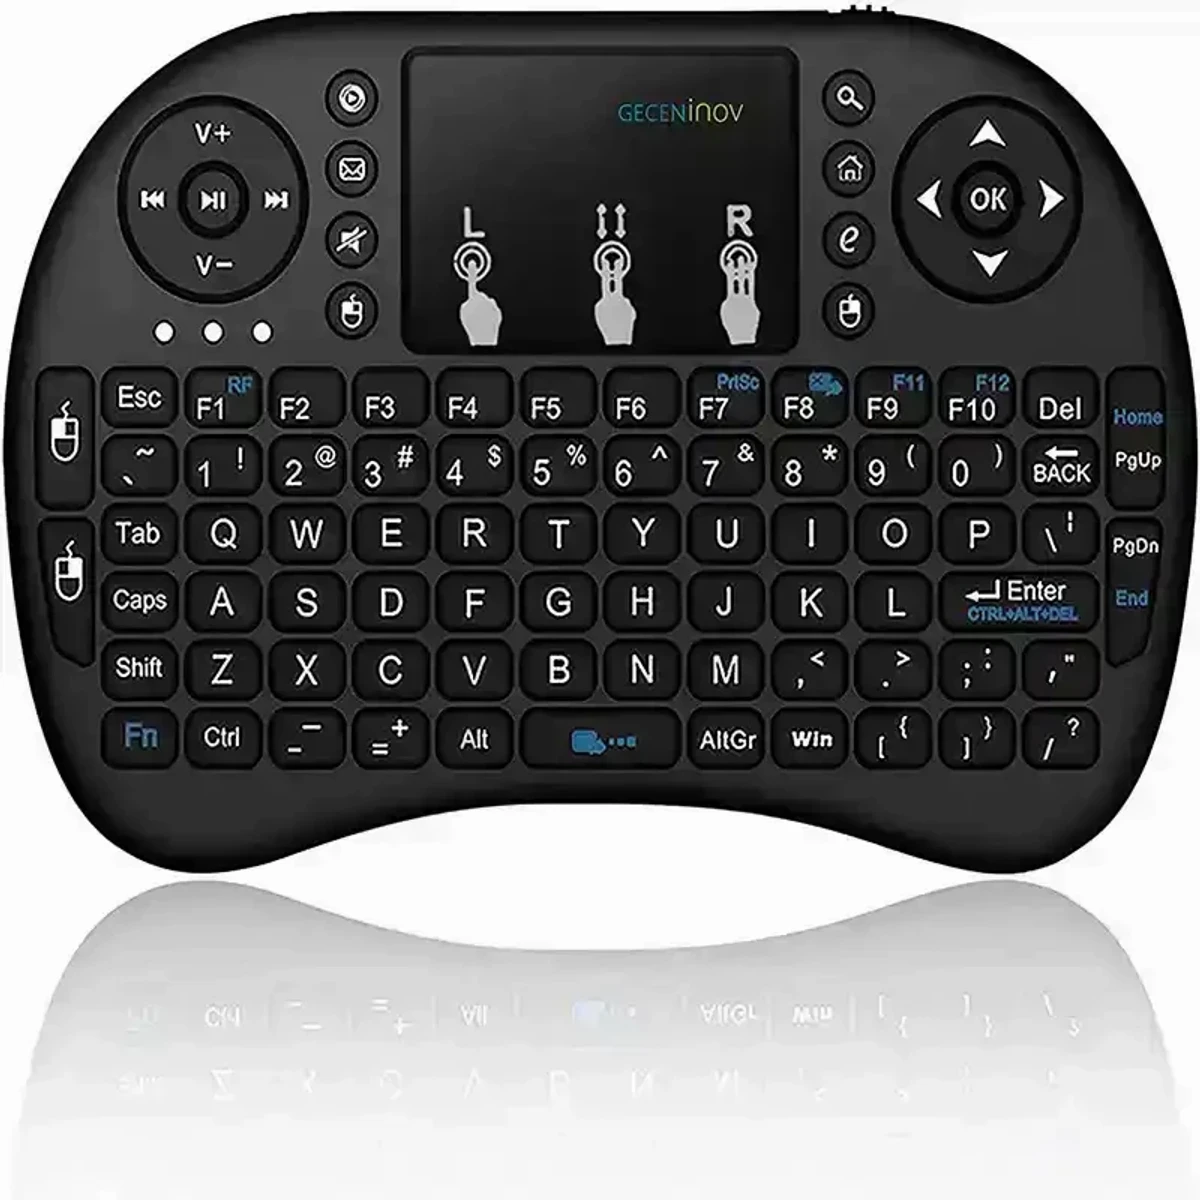 MINI WIRELESS KEYBOARD & TOUCHPAD MOUSE FOR ANDROID TV